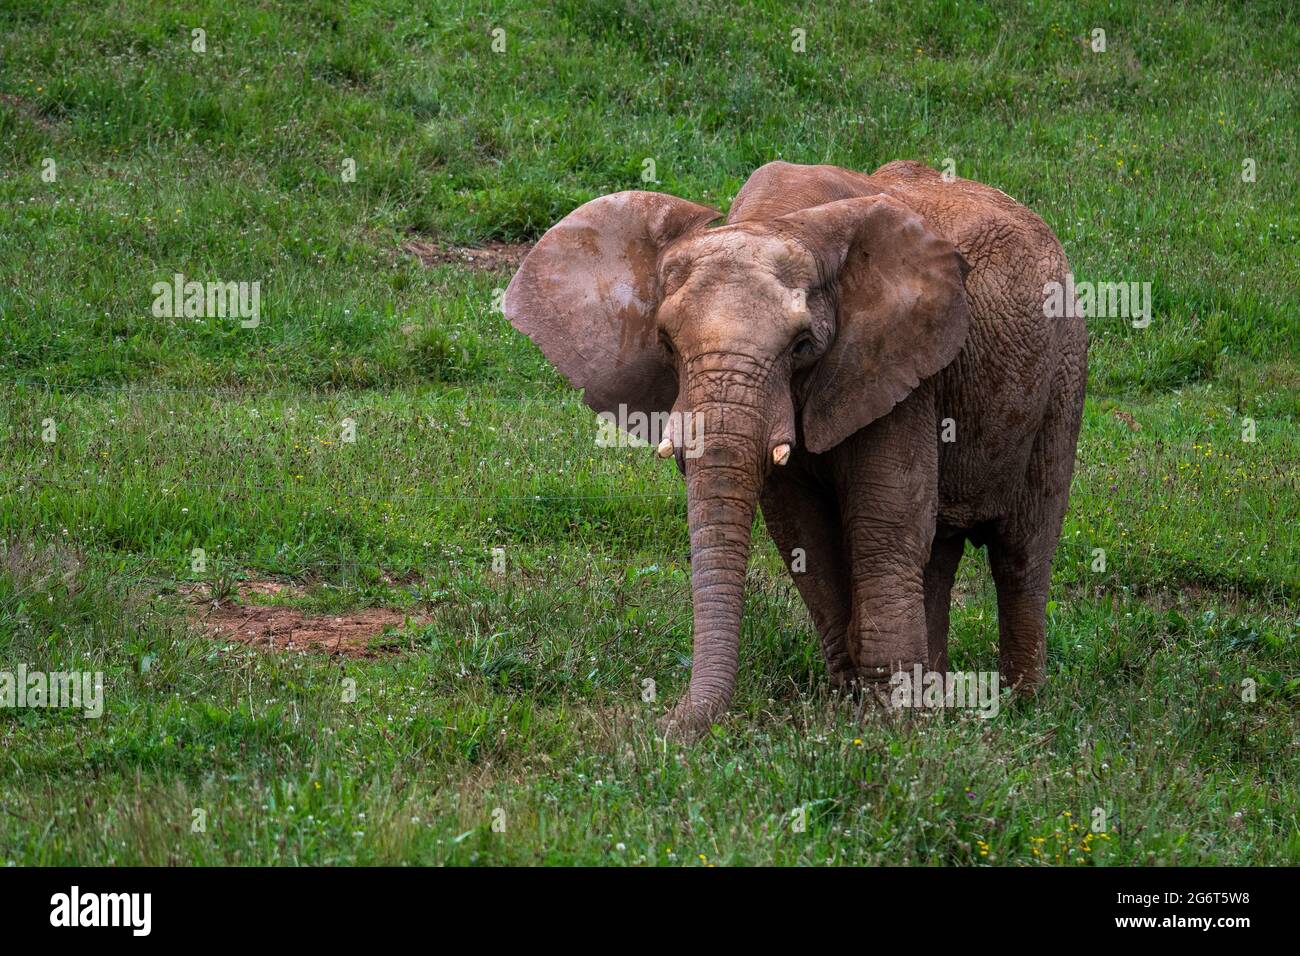 An African Elephant in Cabarceno Nature Park. The Cabarceno Nature Park is not a conventional zoo. It is an area of 750 hectares that houses almost 12 Stock Photo